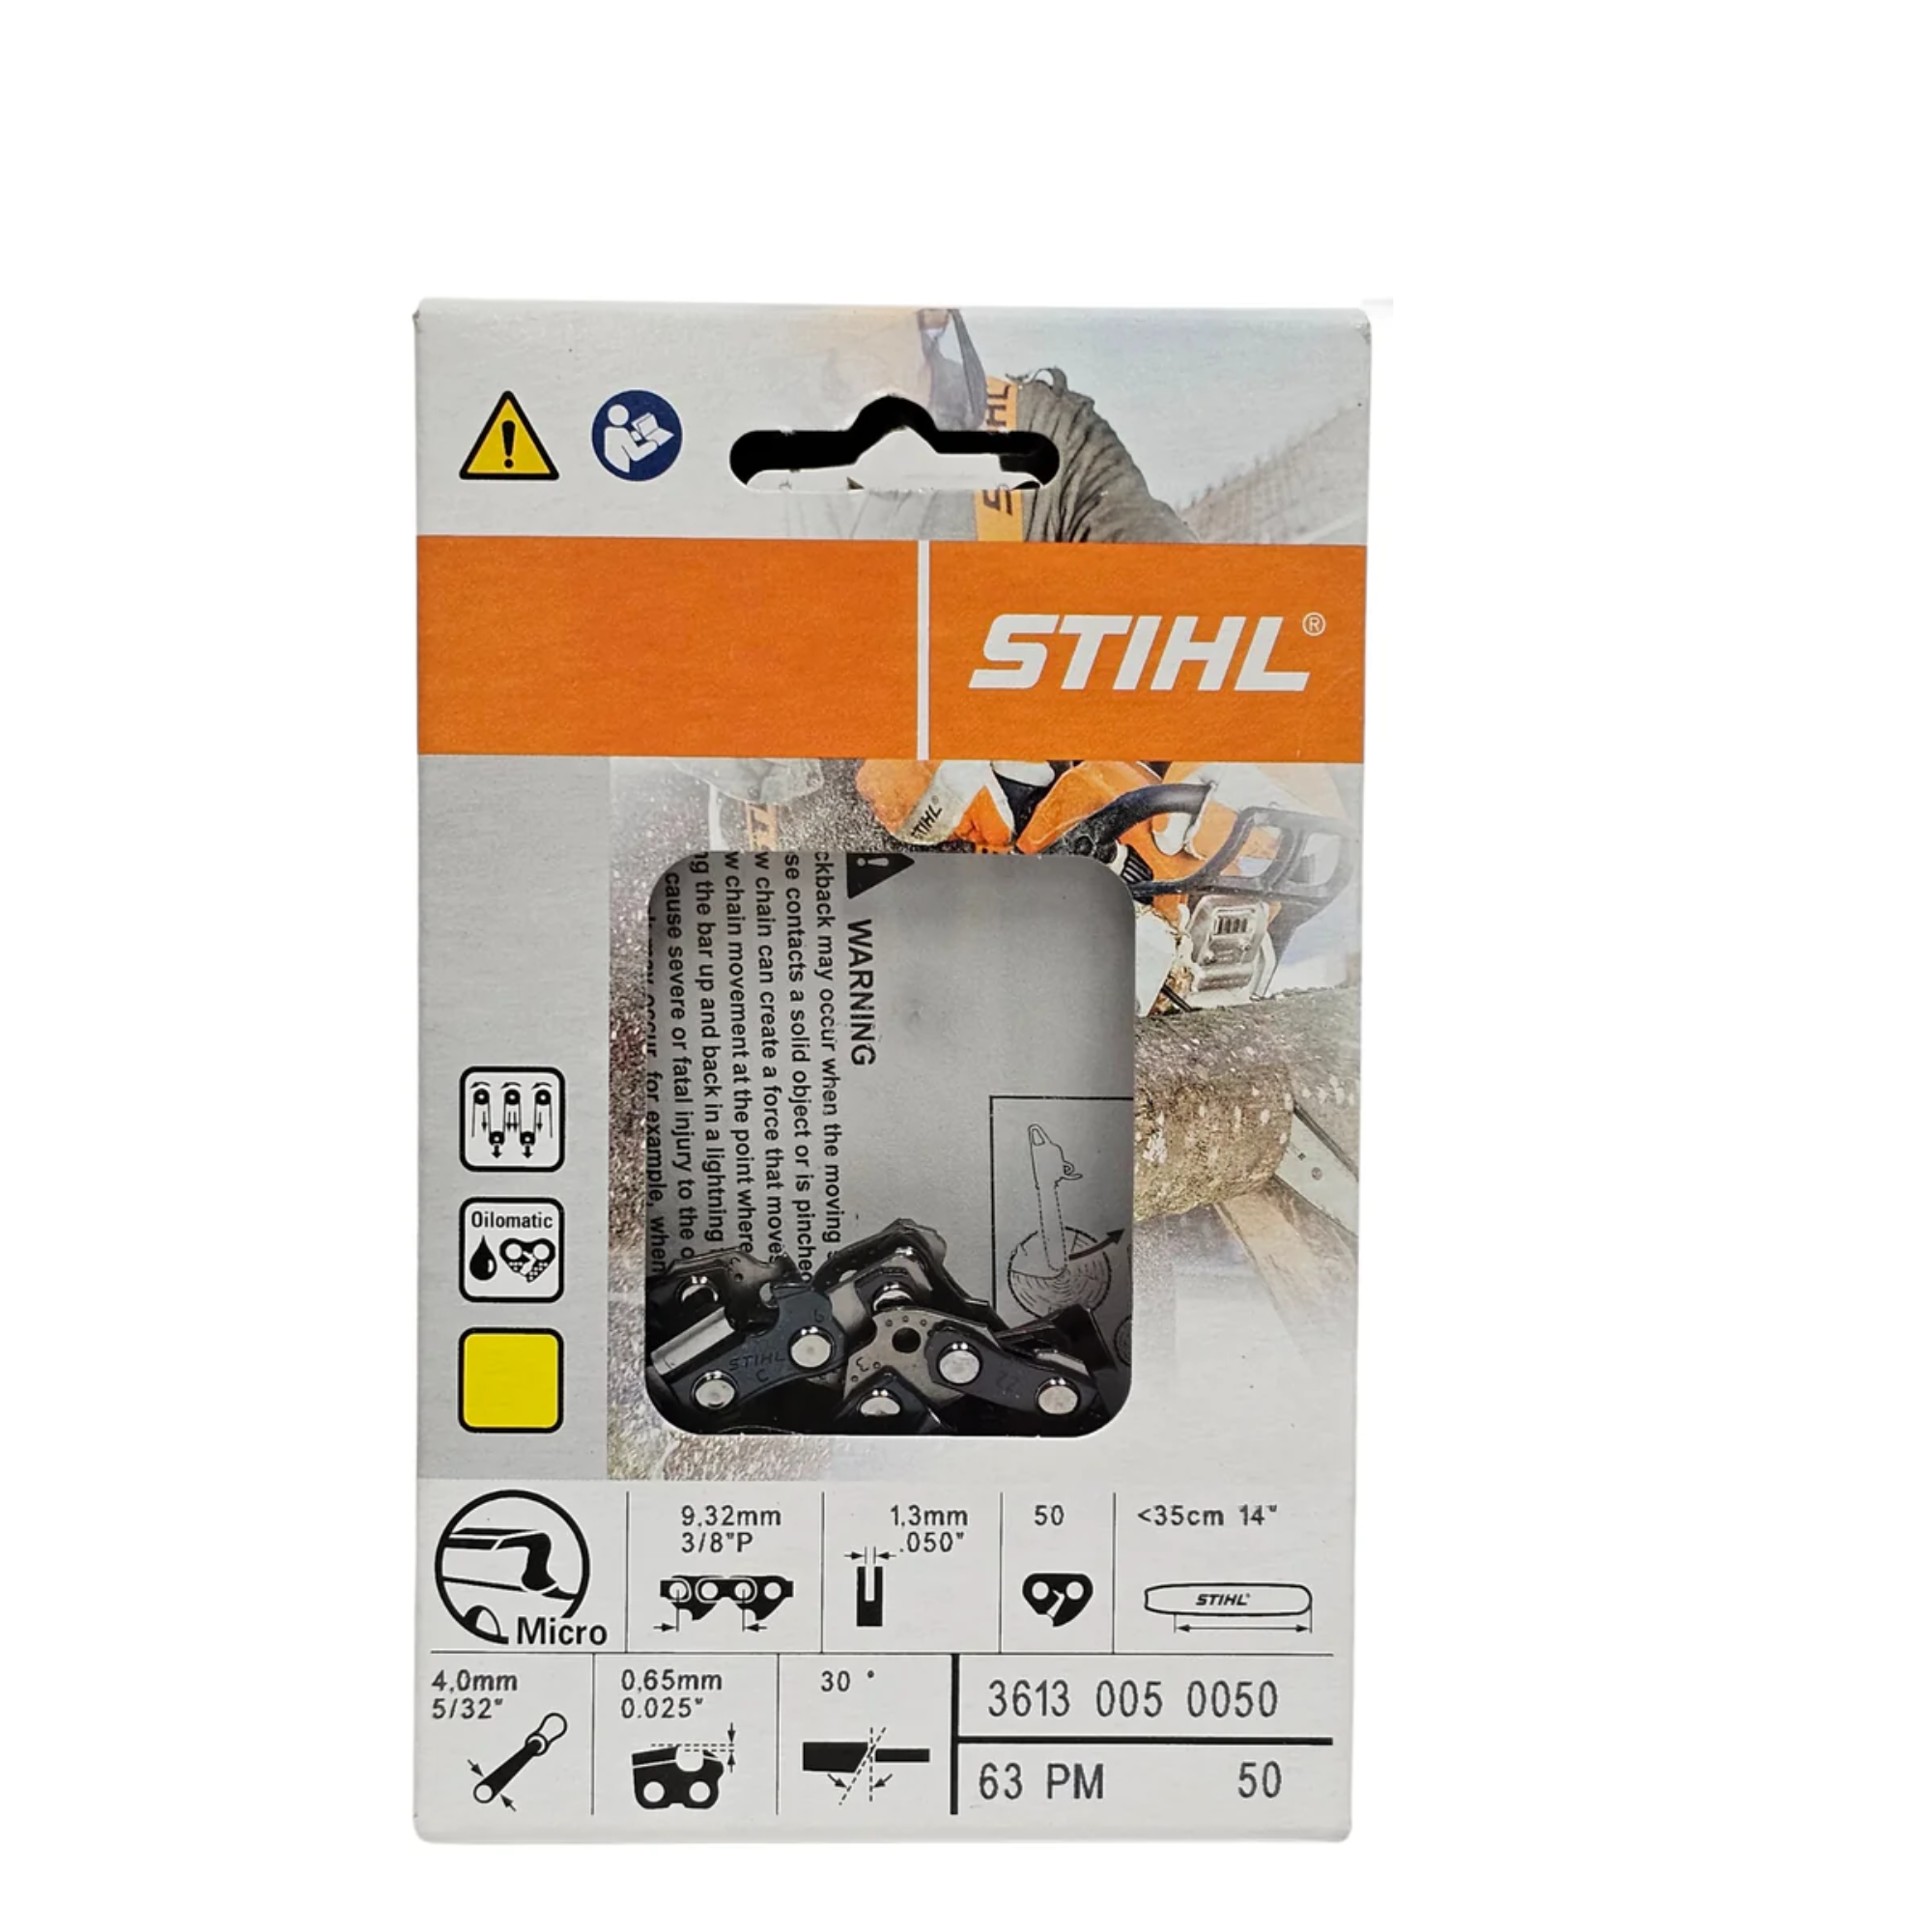 <FONT COLOR=RED >BULK </FONT COLOR=RED >| STIHL Oilomatic Picco Micro | 63 PM 50 | 14 in. | 50 Drive Links | Chainsaw Chain | 3613 005 0050